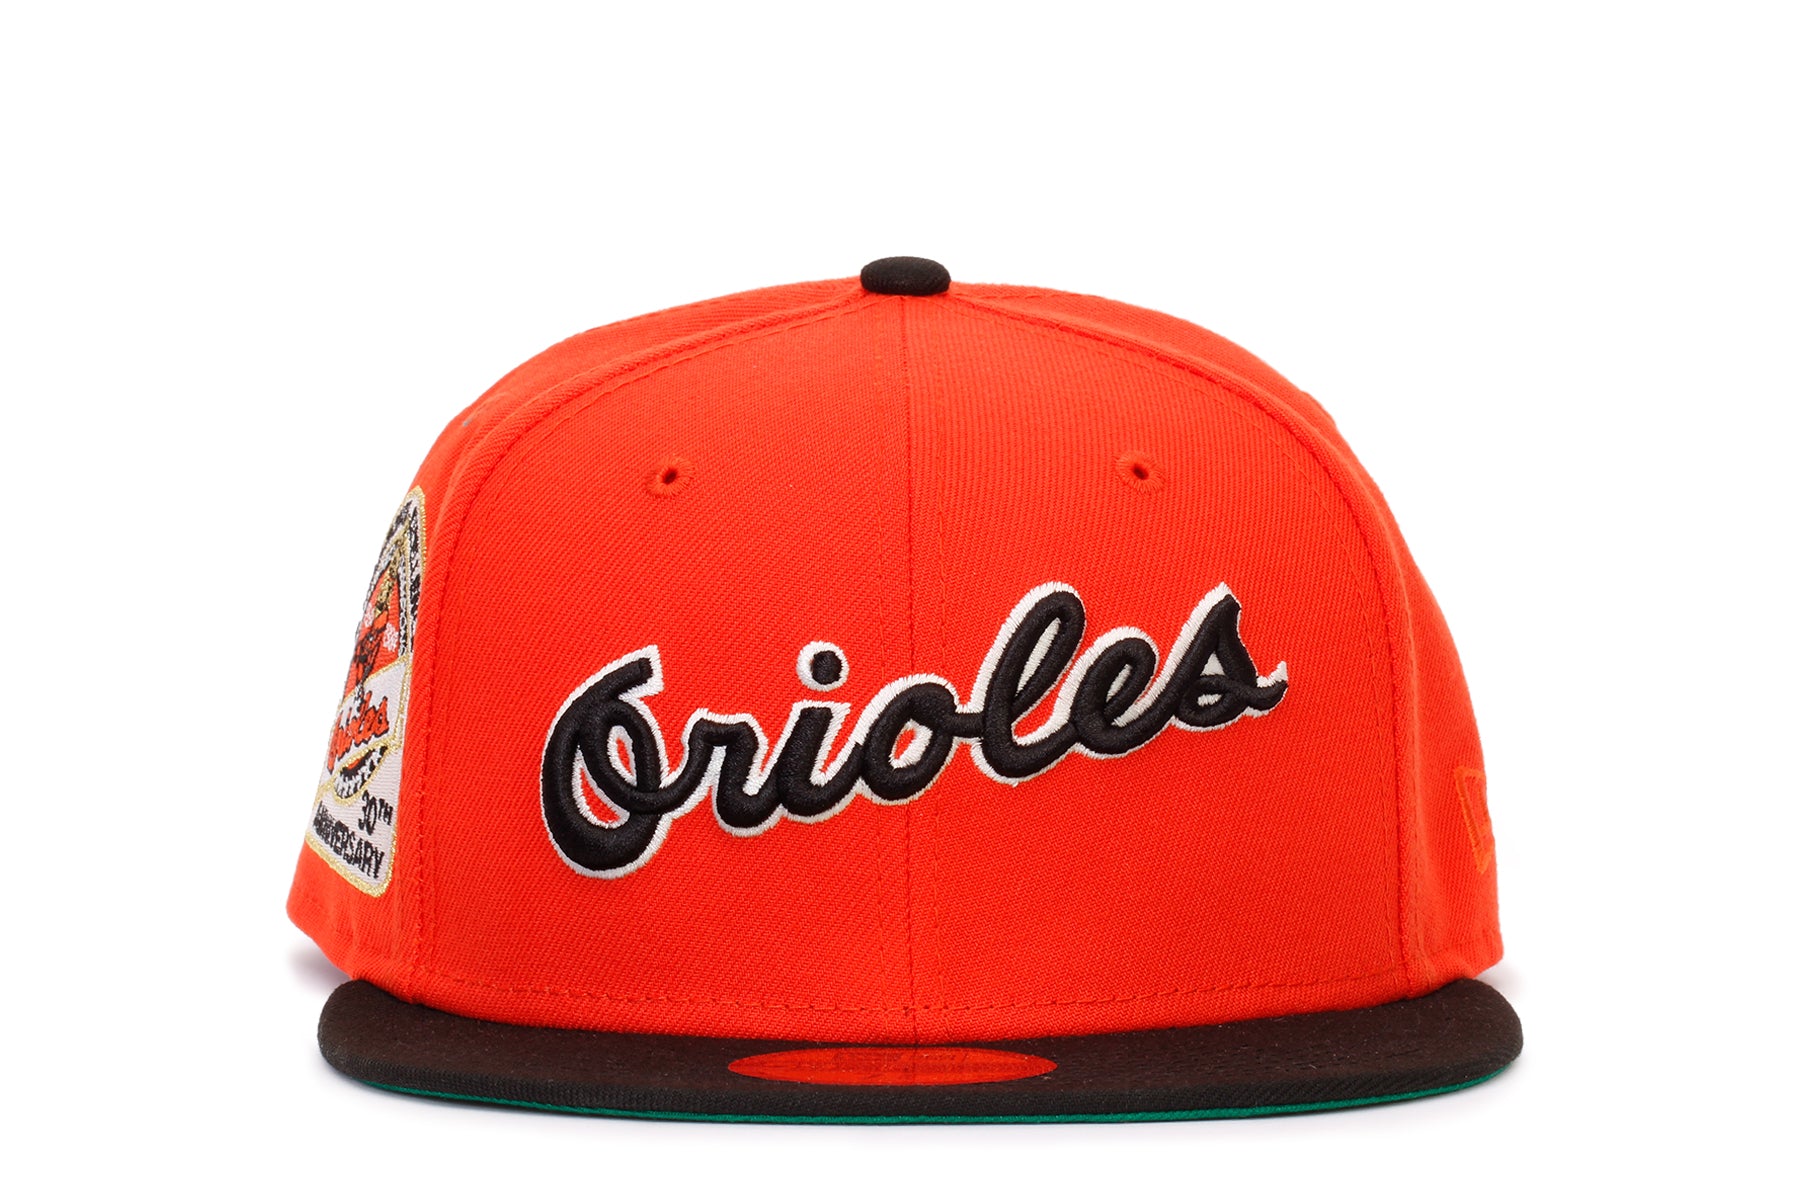 59FIFTY Baltimore Orioles Retro Jersey Script Fitted Hat